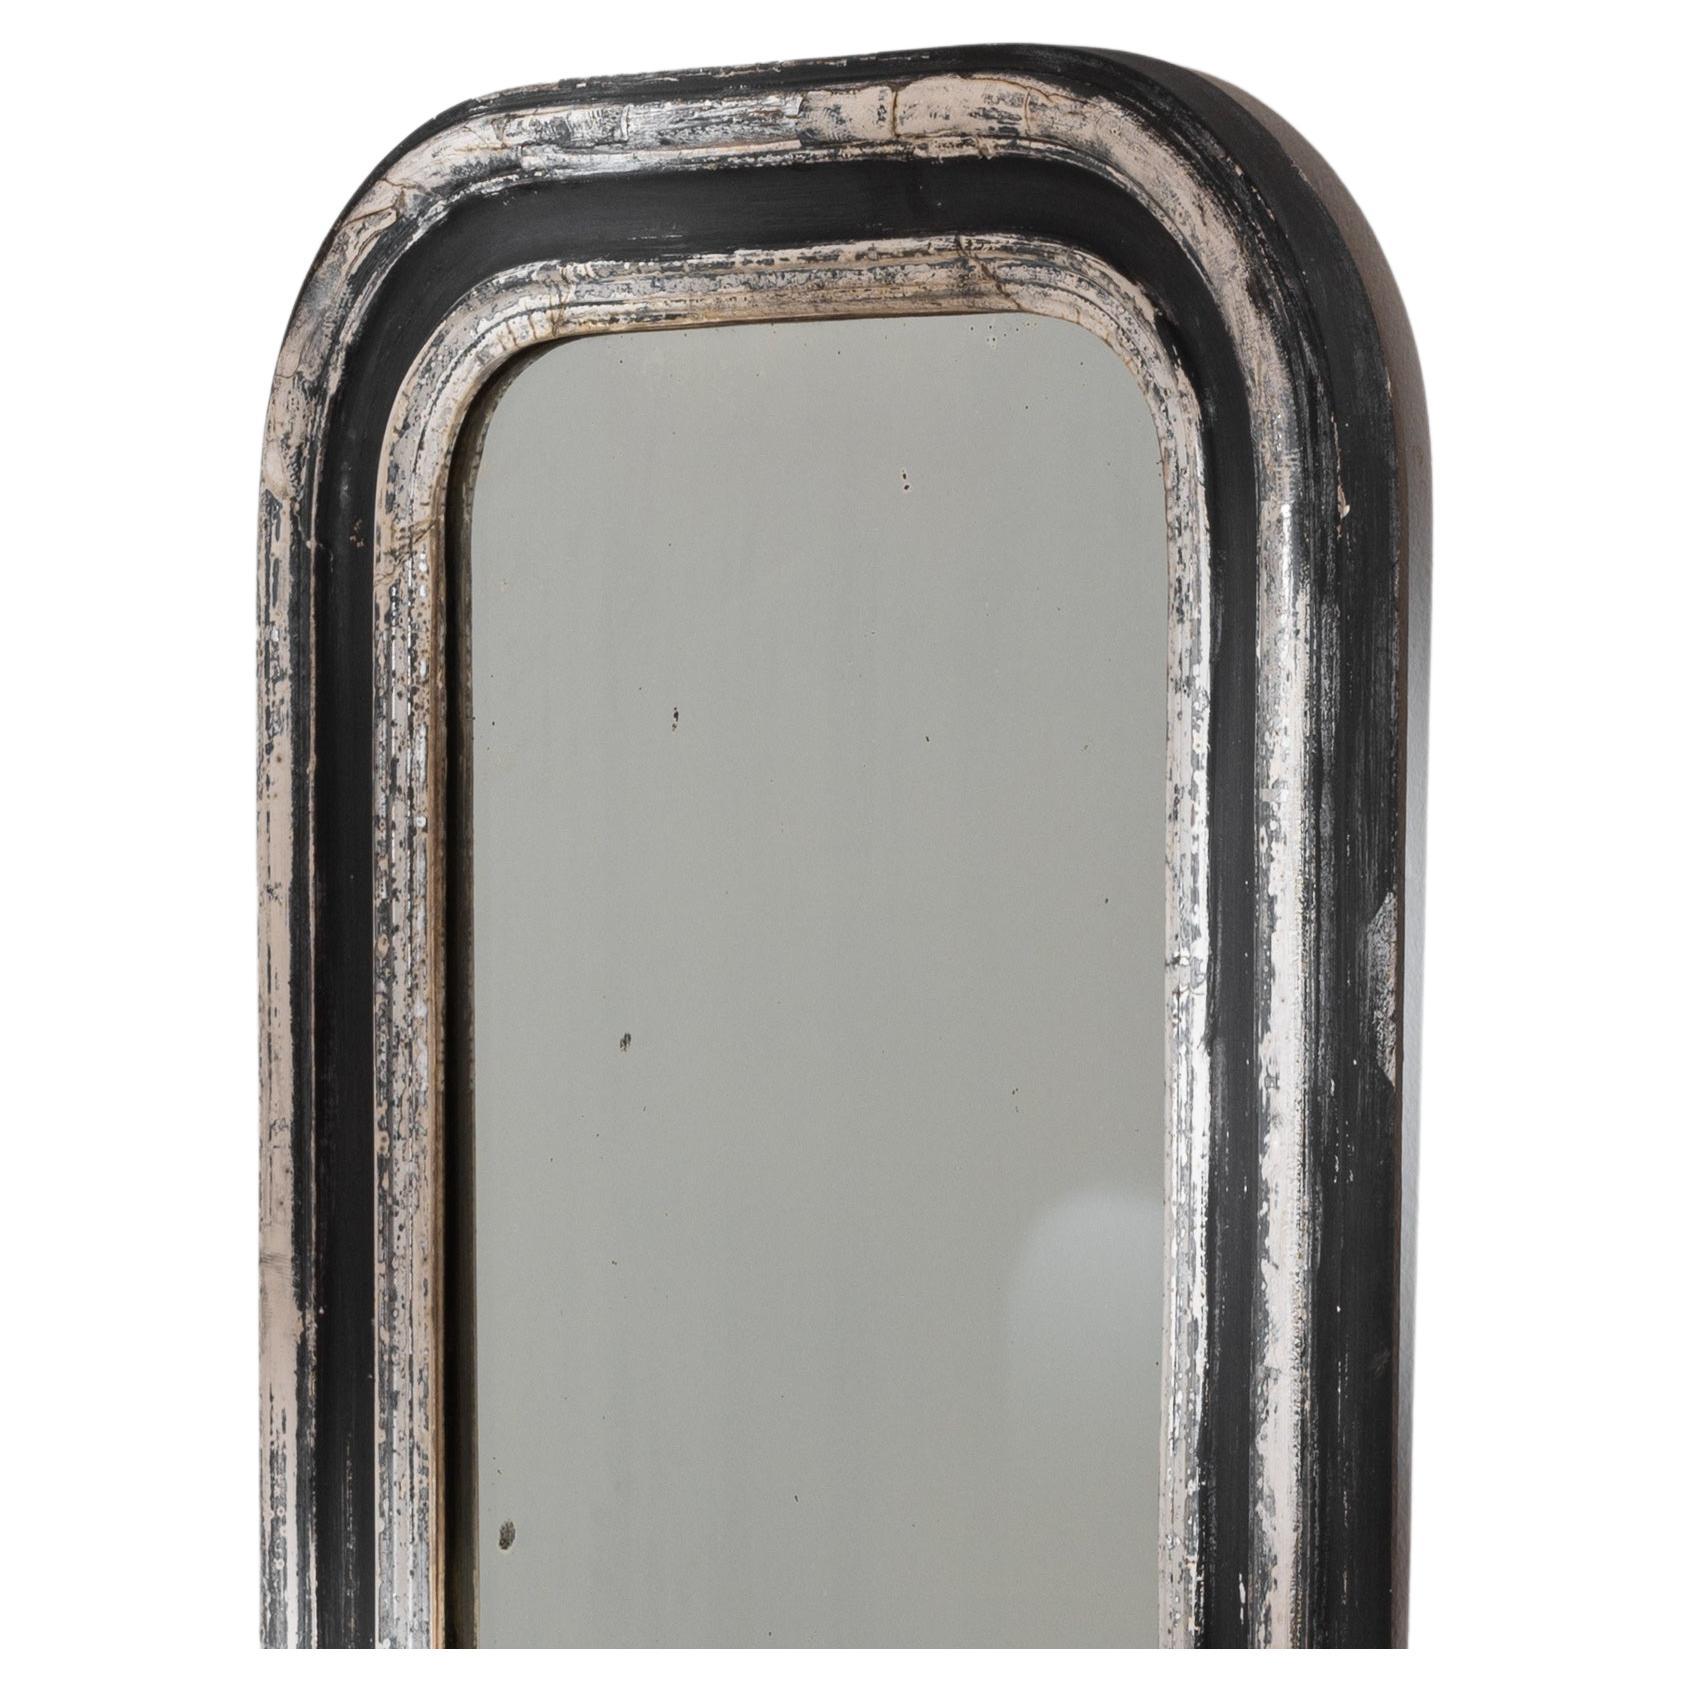 Immerse yourself in the allure of the 1900s with this French Wood Patinated Mirror, a harmonious blend of sophistication and timeless design. The mirror features a distinctive border arrangement, with two silver borders gracefully embracing a